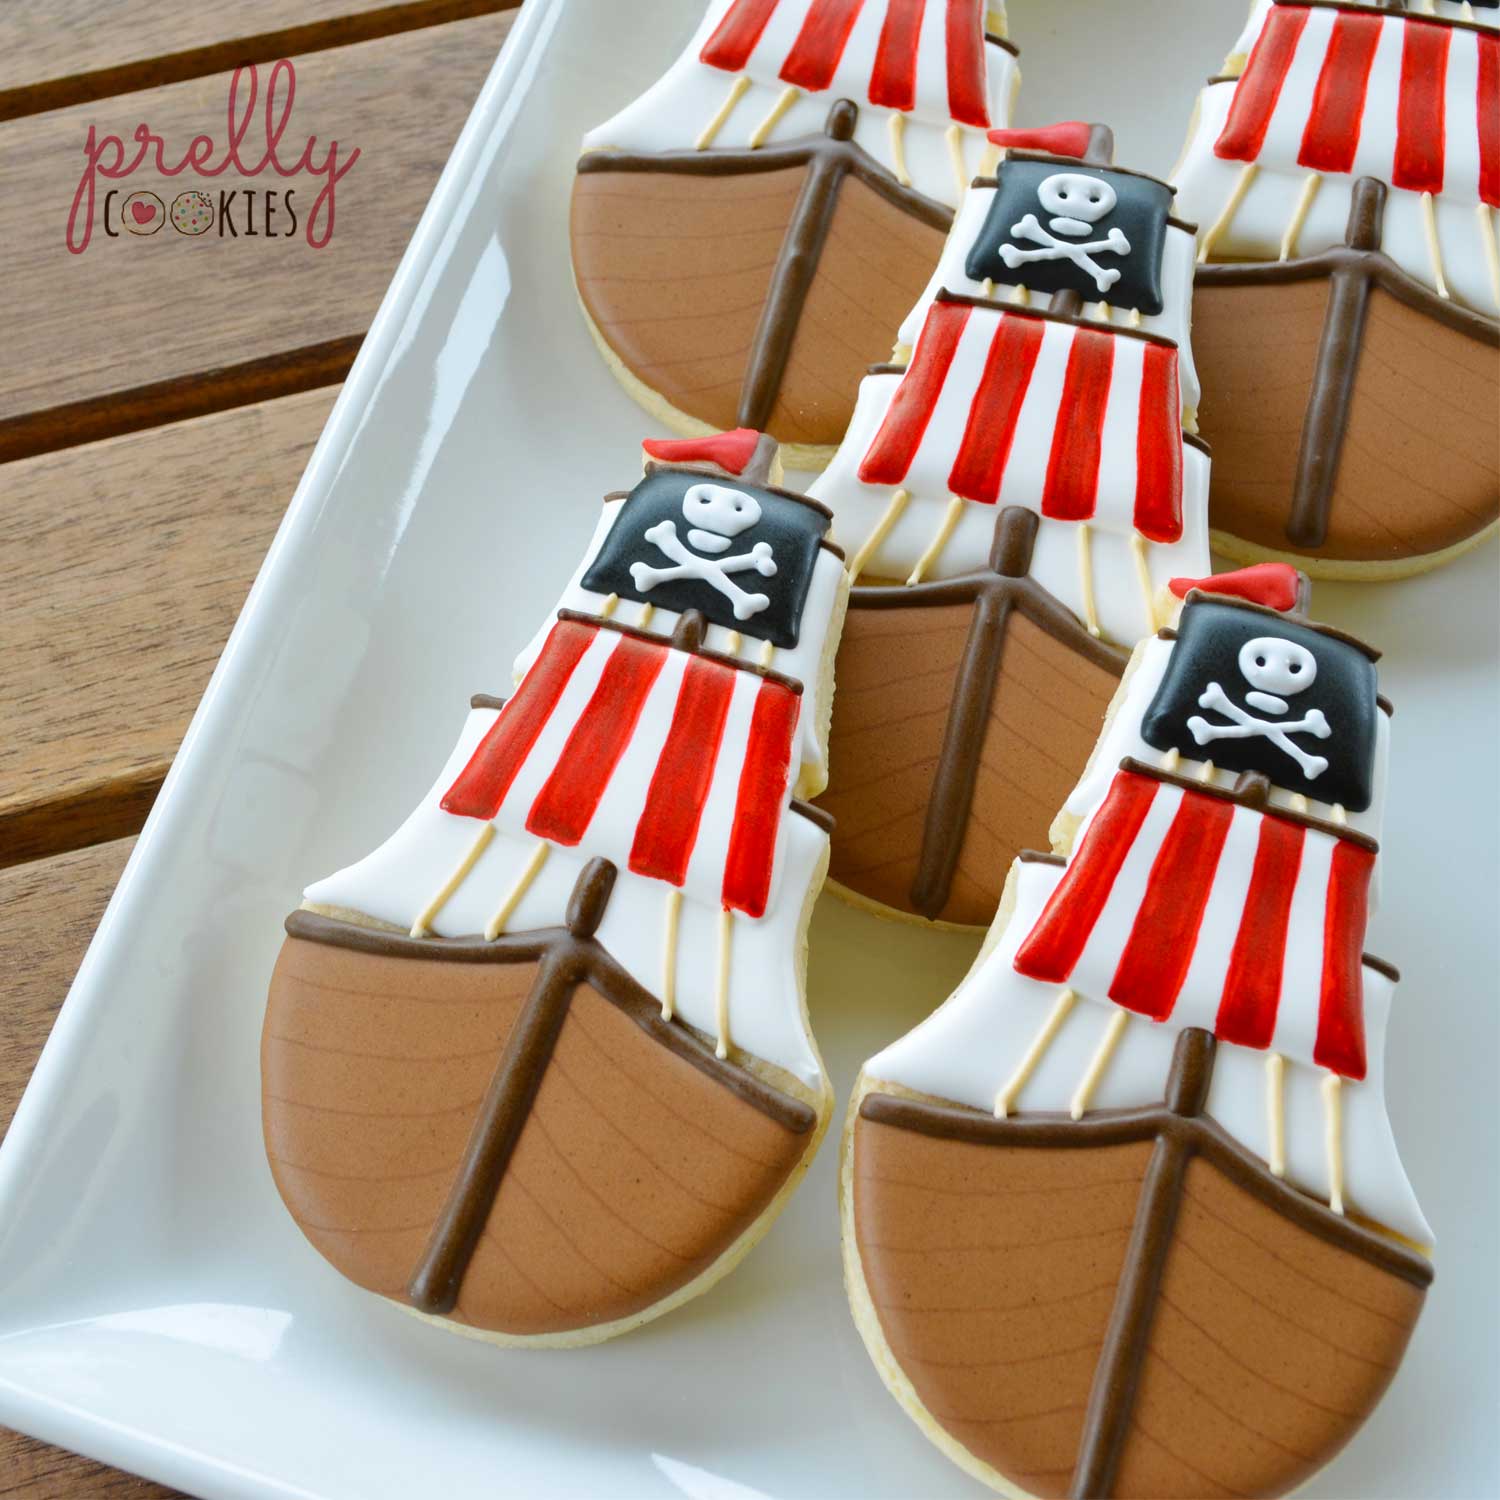 pirate-ship-cookies-square